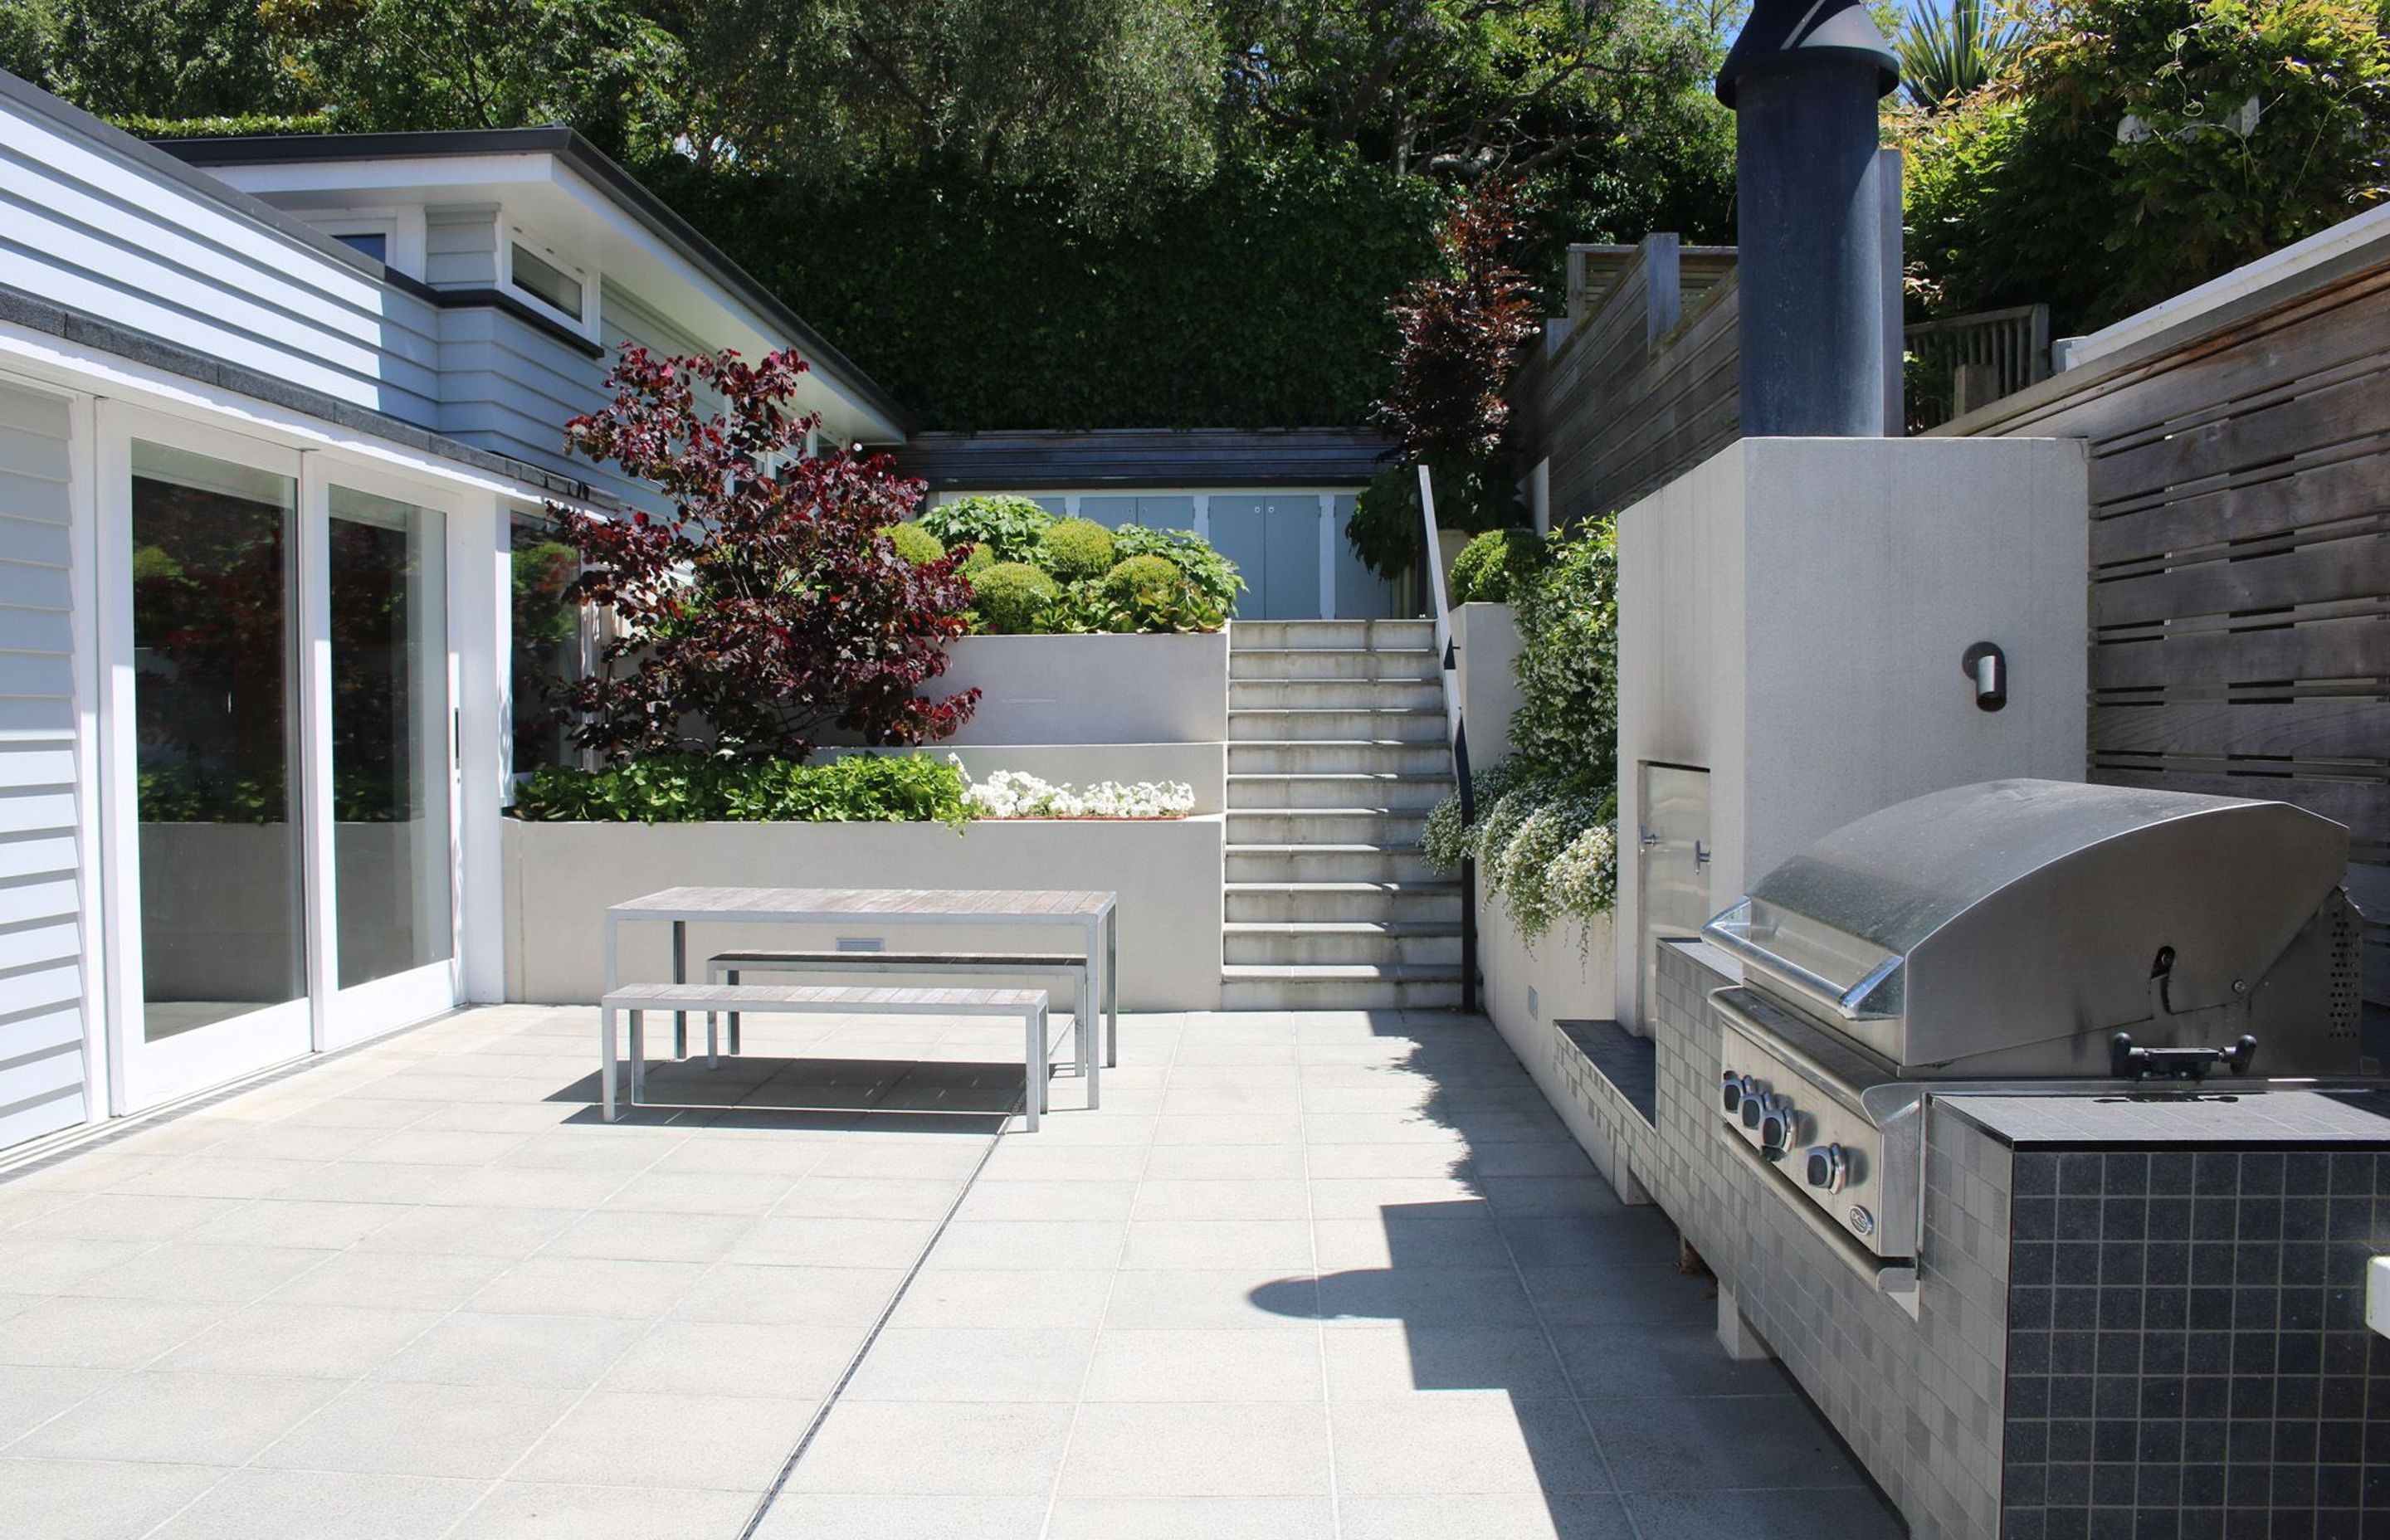 Outdoor living &amp; entertaining area. Architecture &amp; associated landscape architecture by Tse : Wallace Architects.